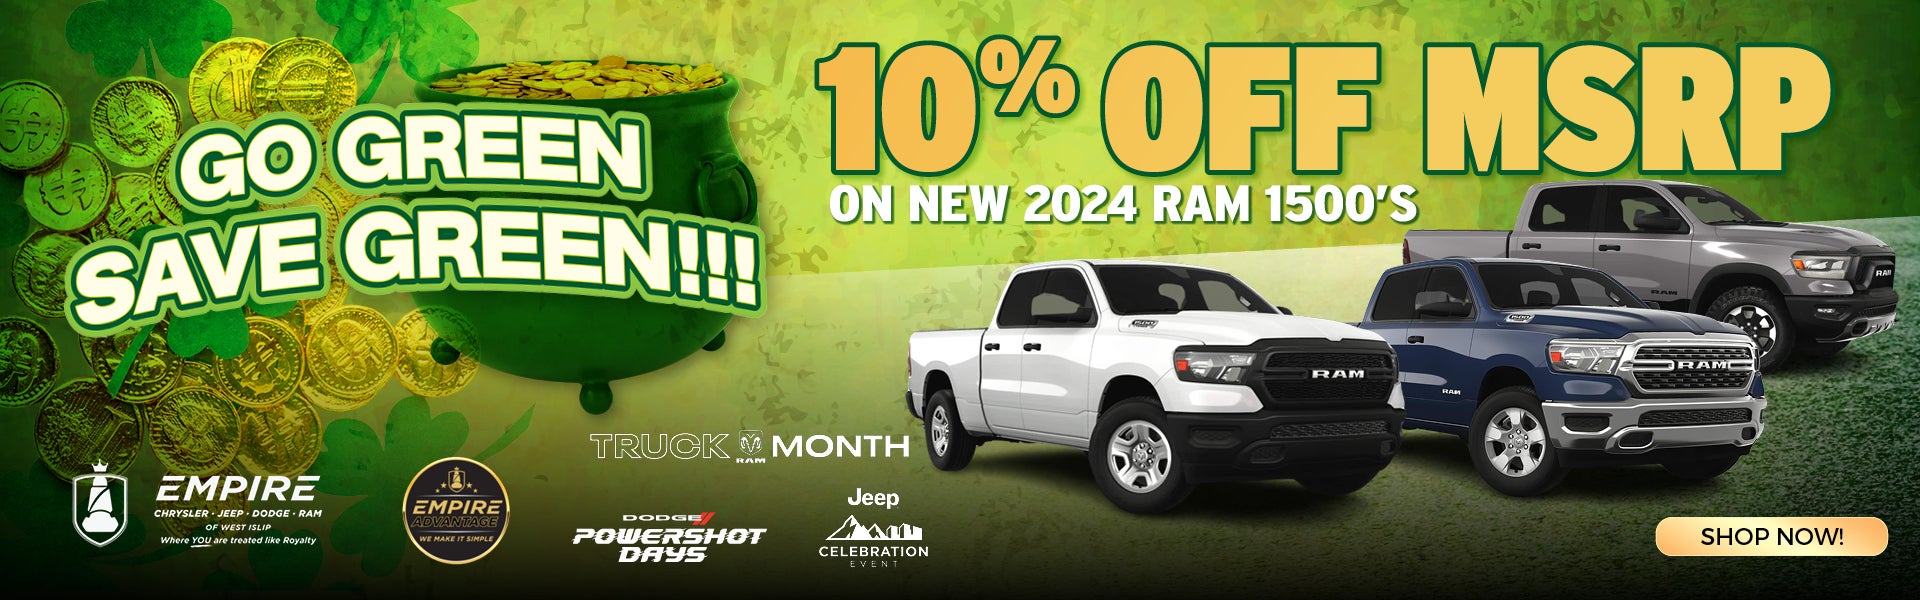 10% OFF MSRP on New 2024 Ram 1500's